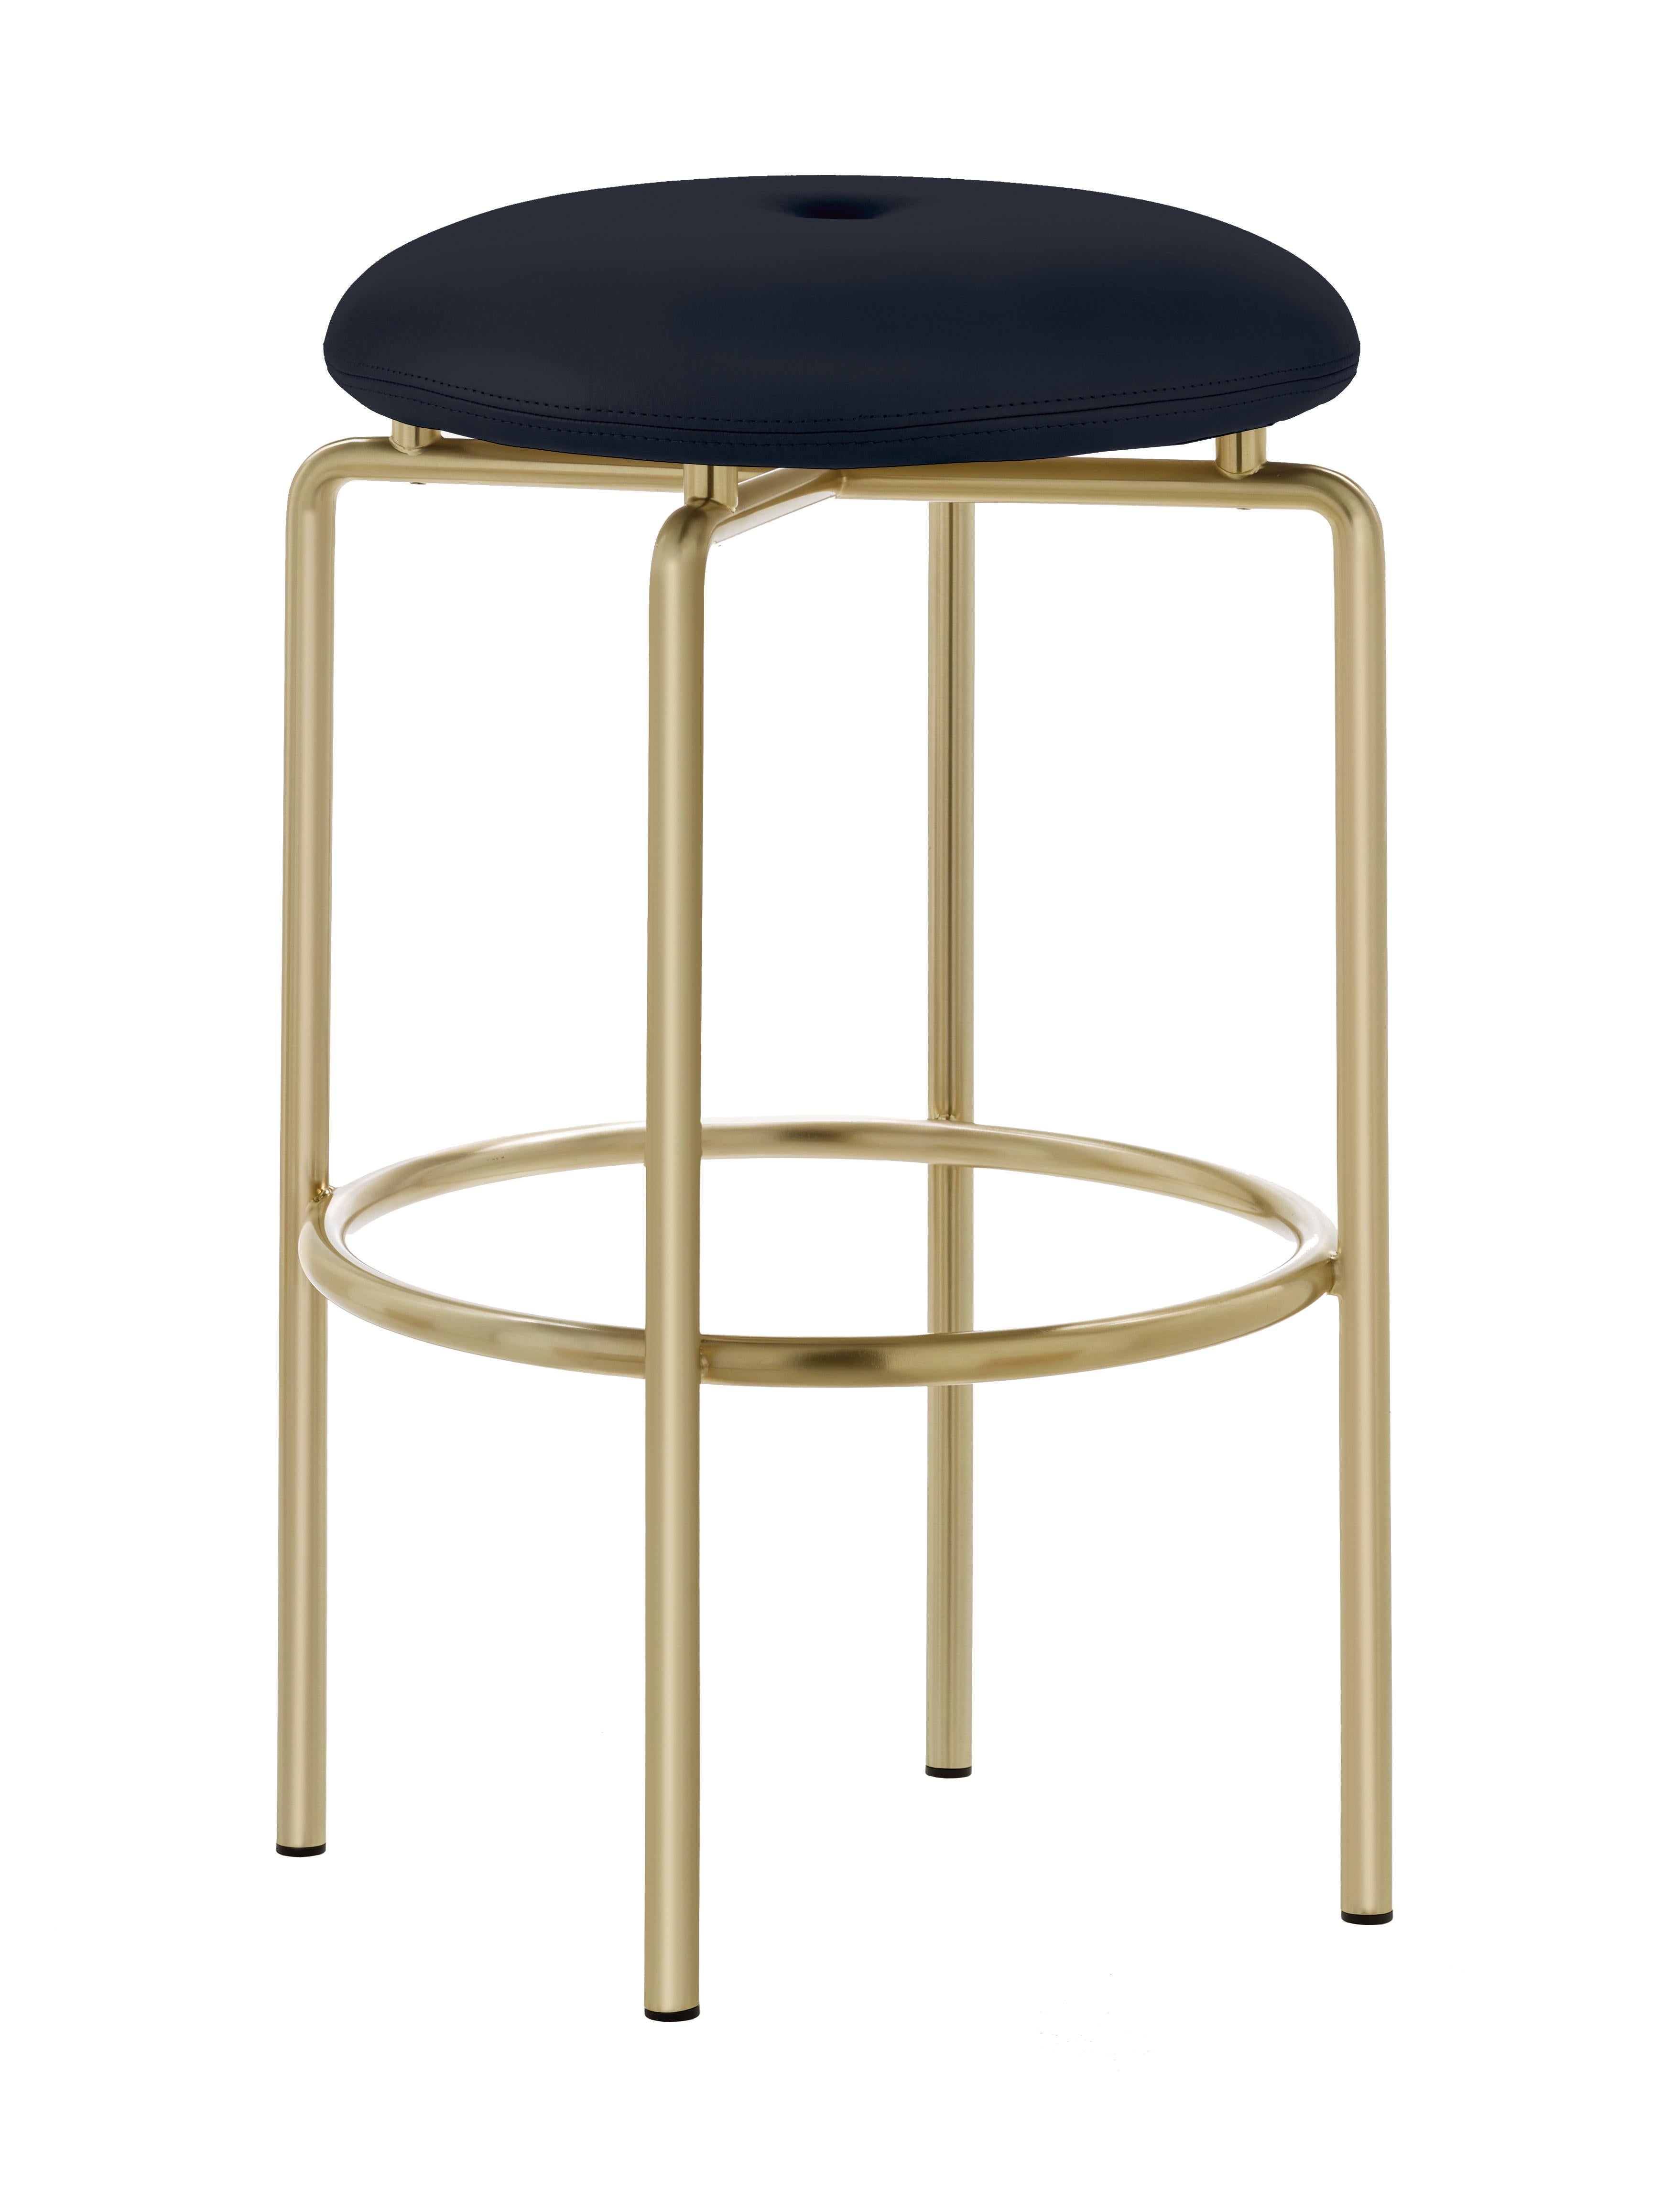 For Sale: Blue (Elegant 97026 Dark Navy) Circular Counter Stool in Satin Brass and Leather Designed by Craig Bassam